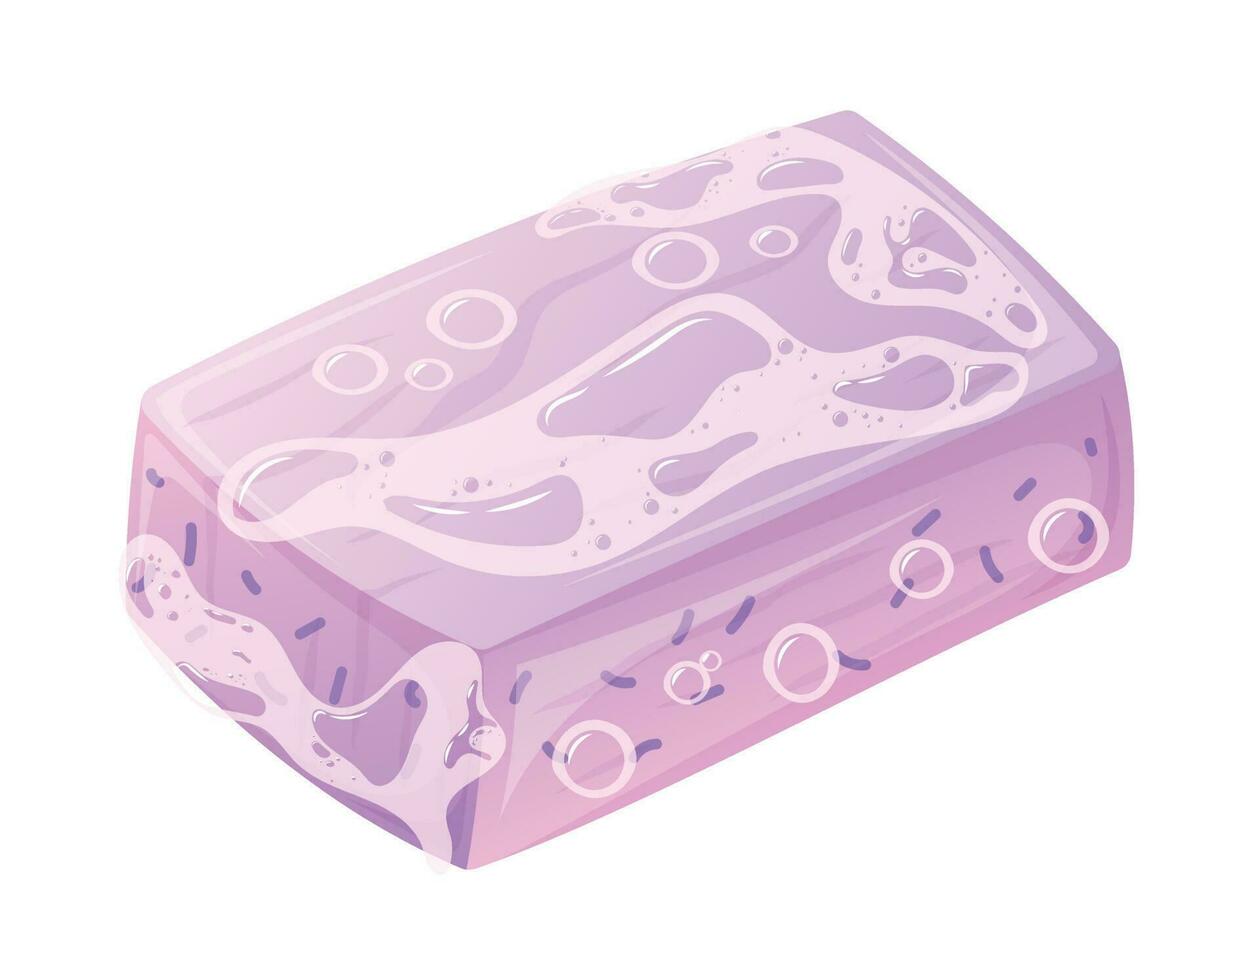 Handmade pueple soap bar with foam and bubbles. Vector isolated cartoon illustration of natural hygiene product.